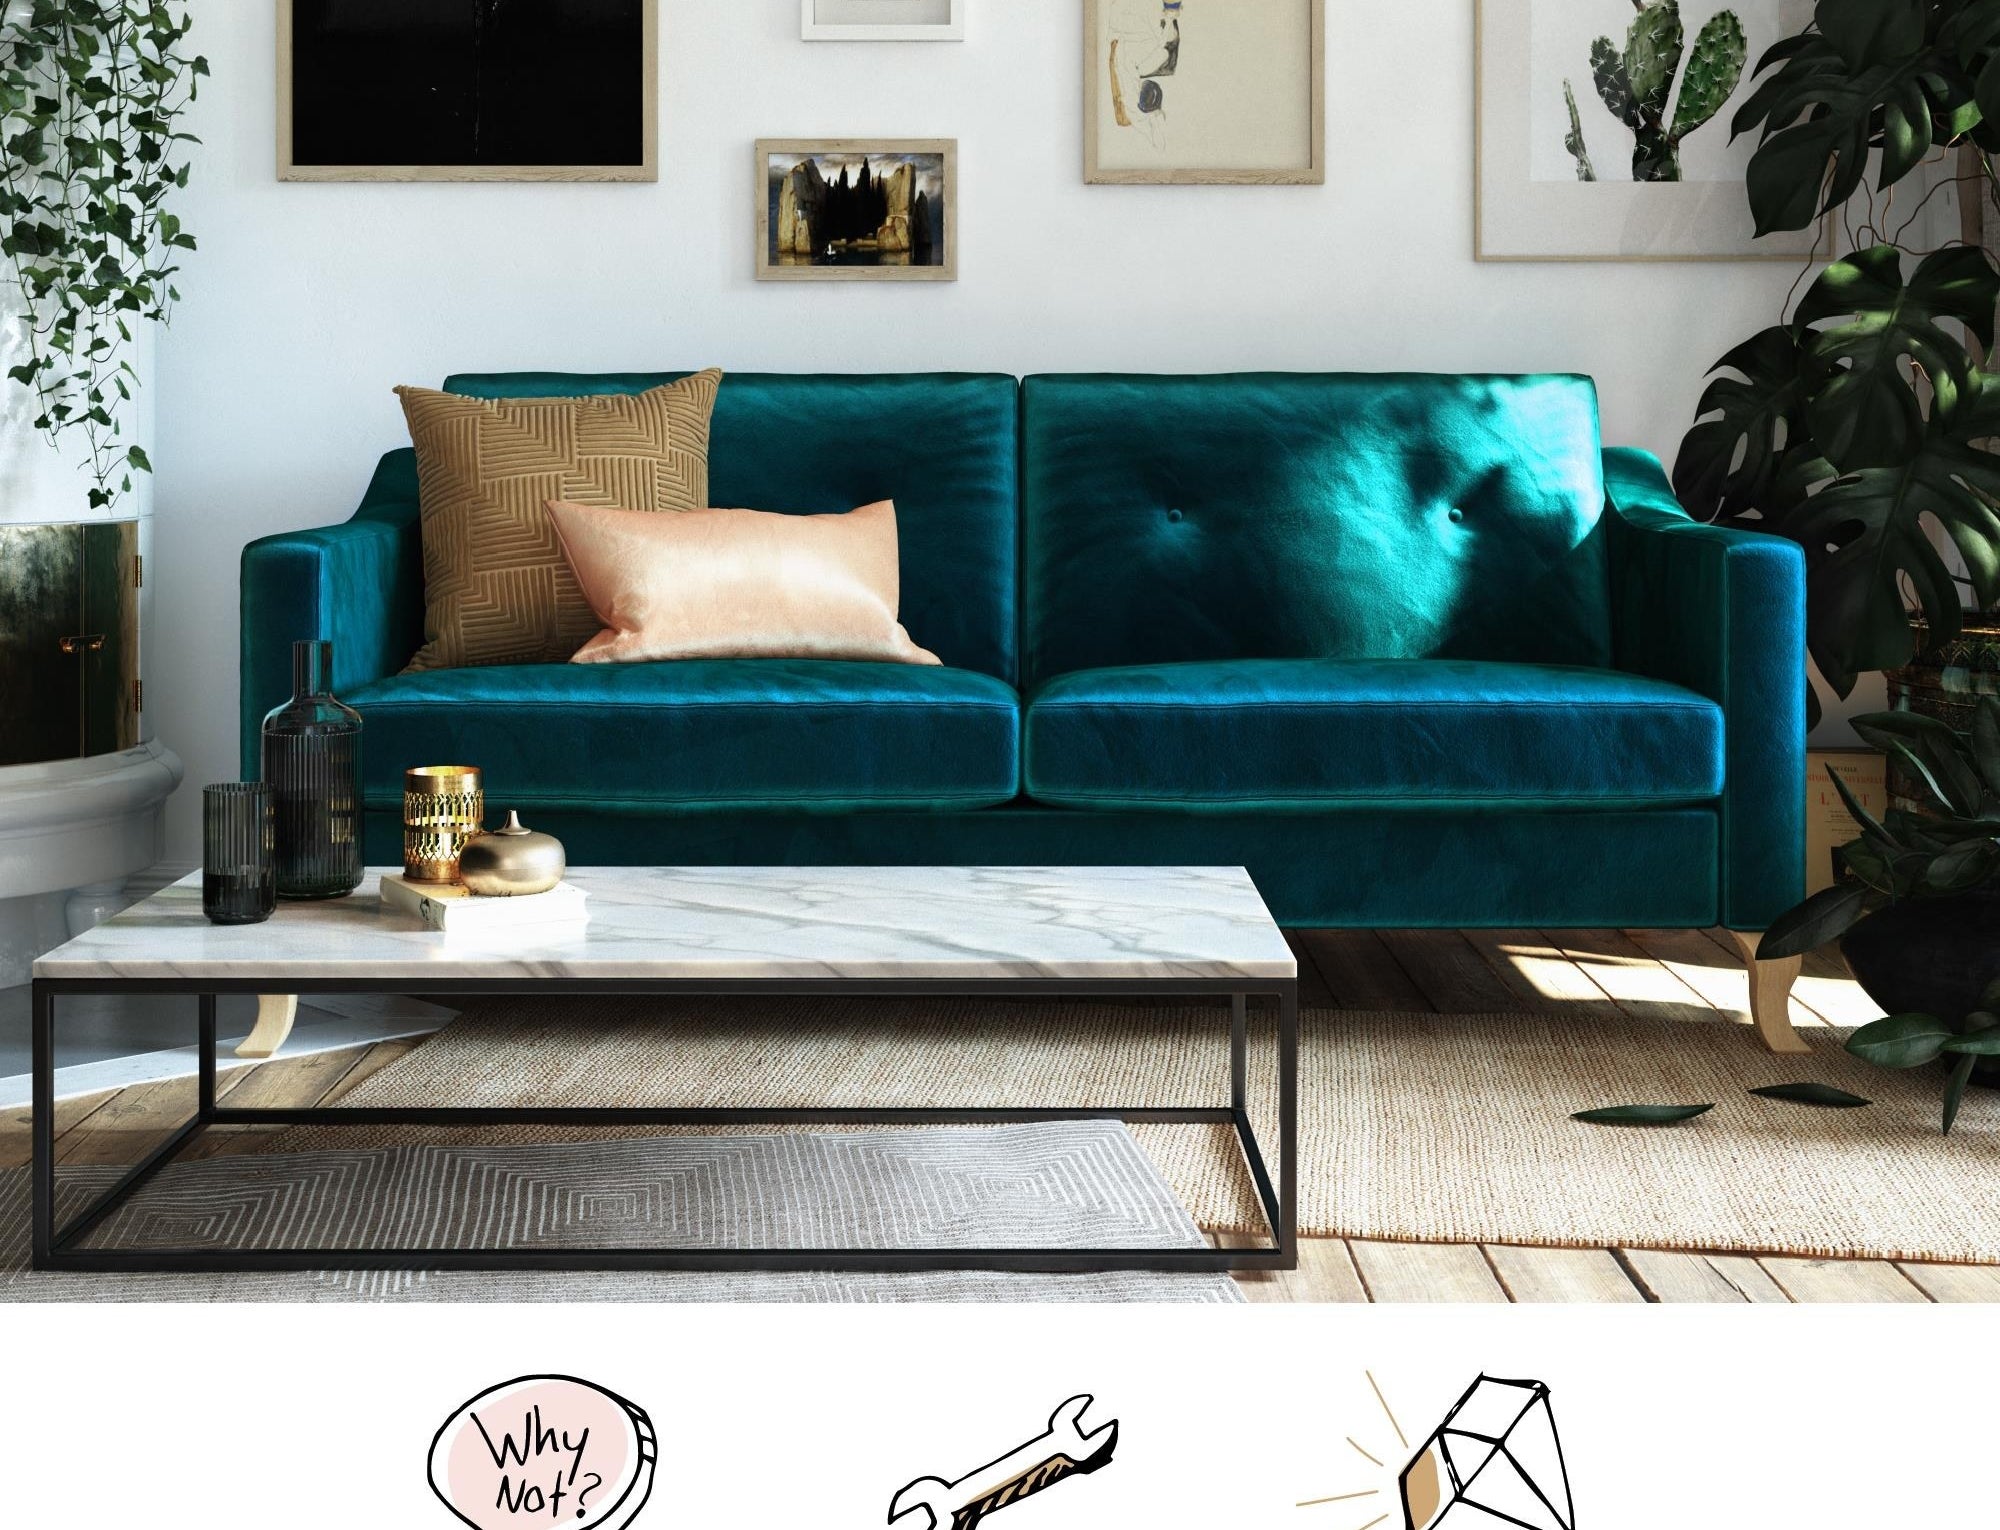 The green velvet couch with sloped arms in a living room